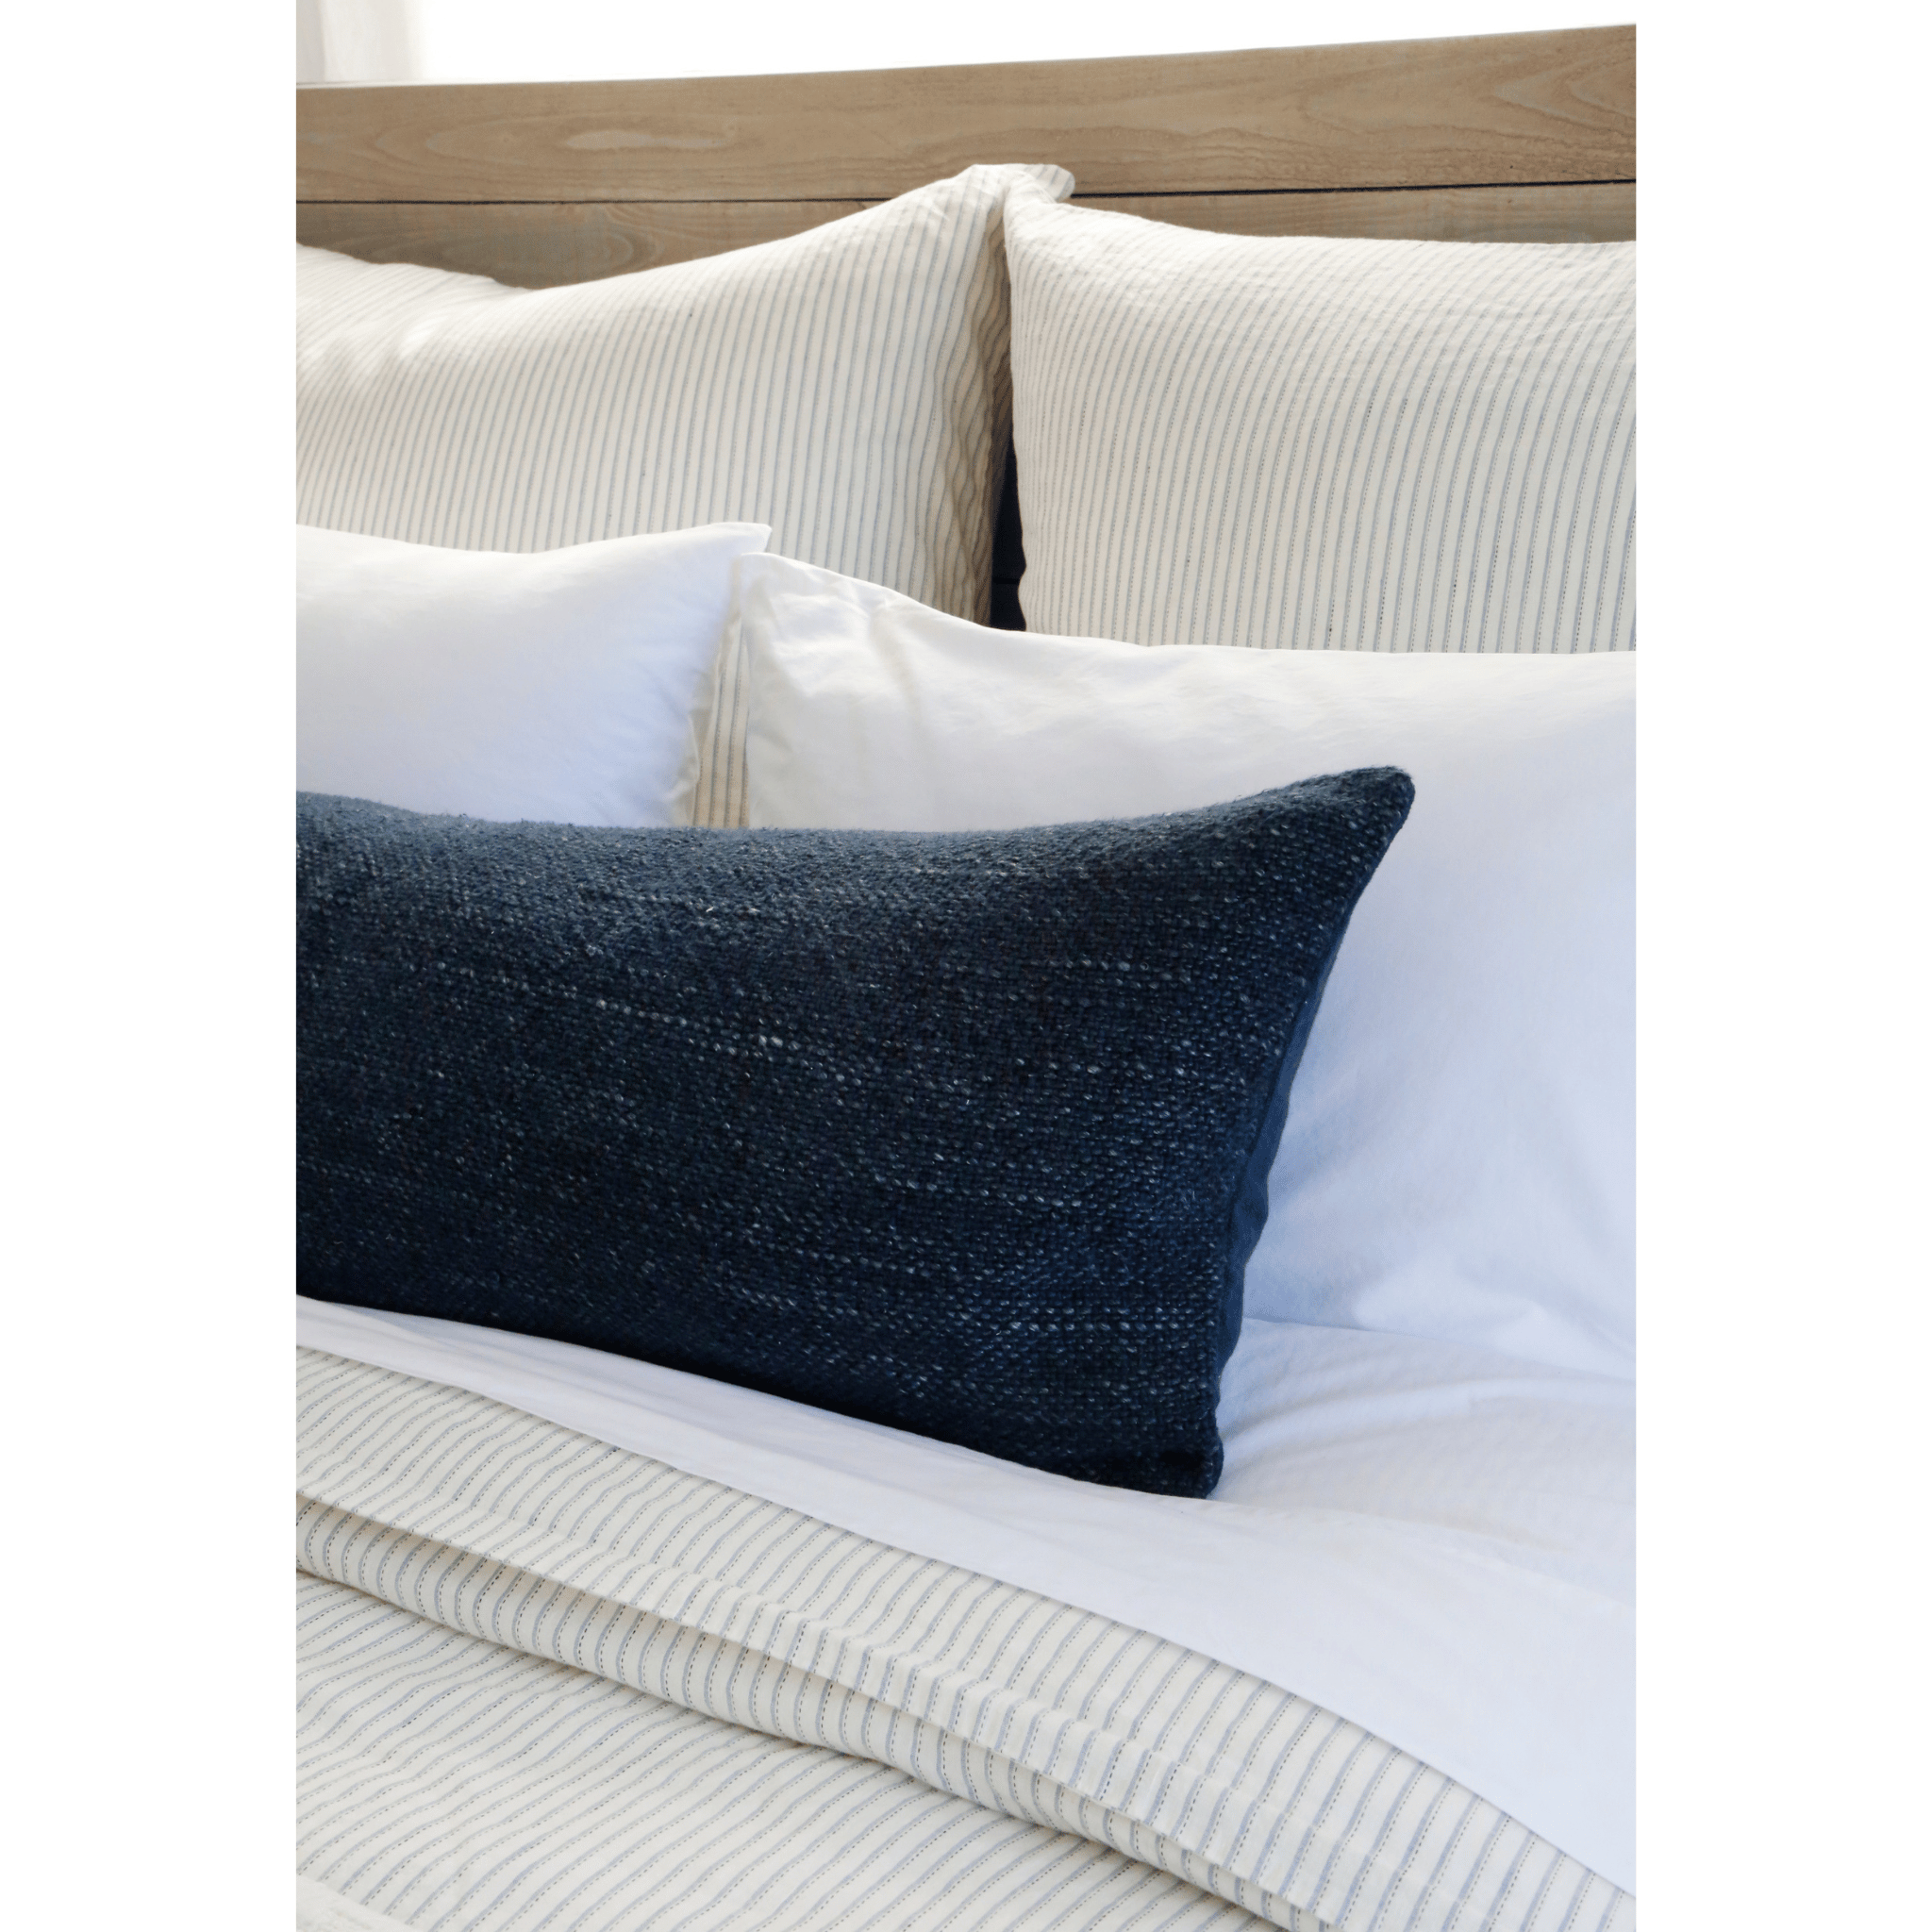 Connor Big Pillow With Insert – Pom Pom at Home